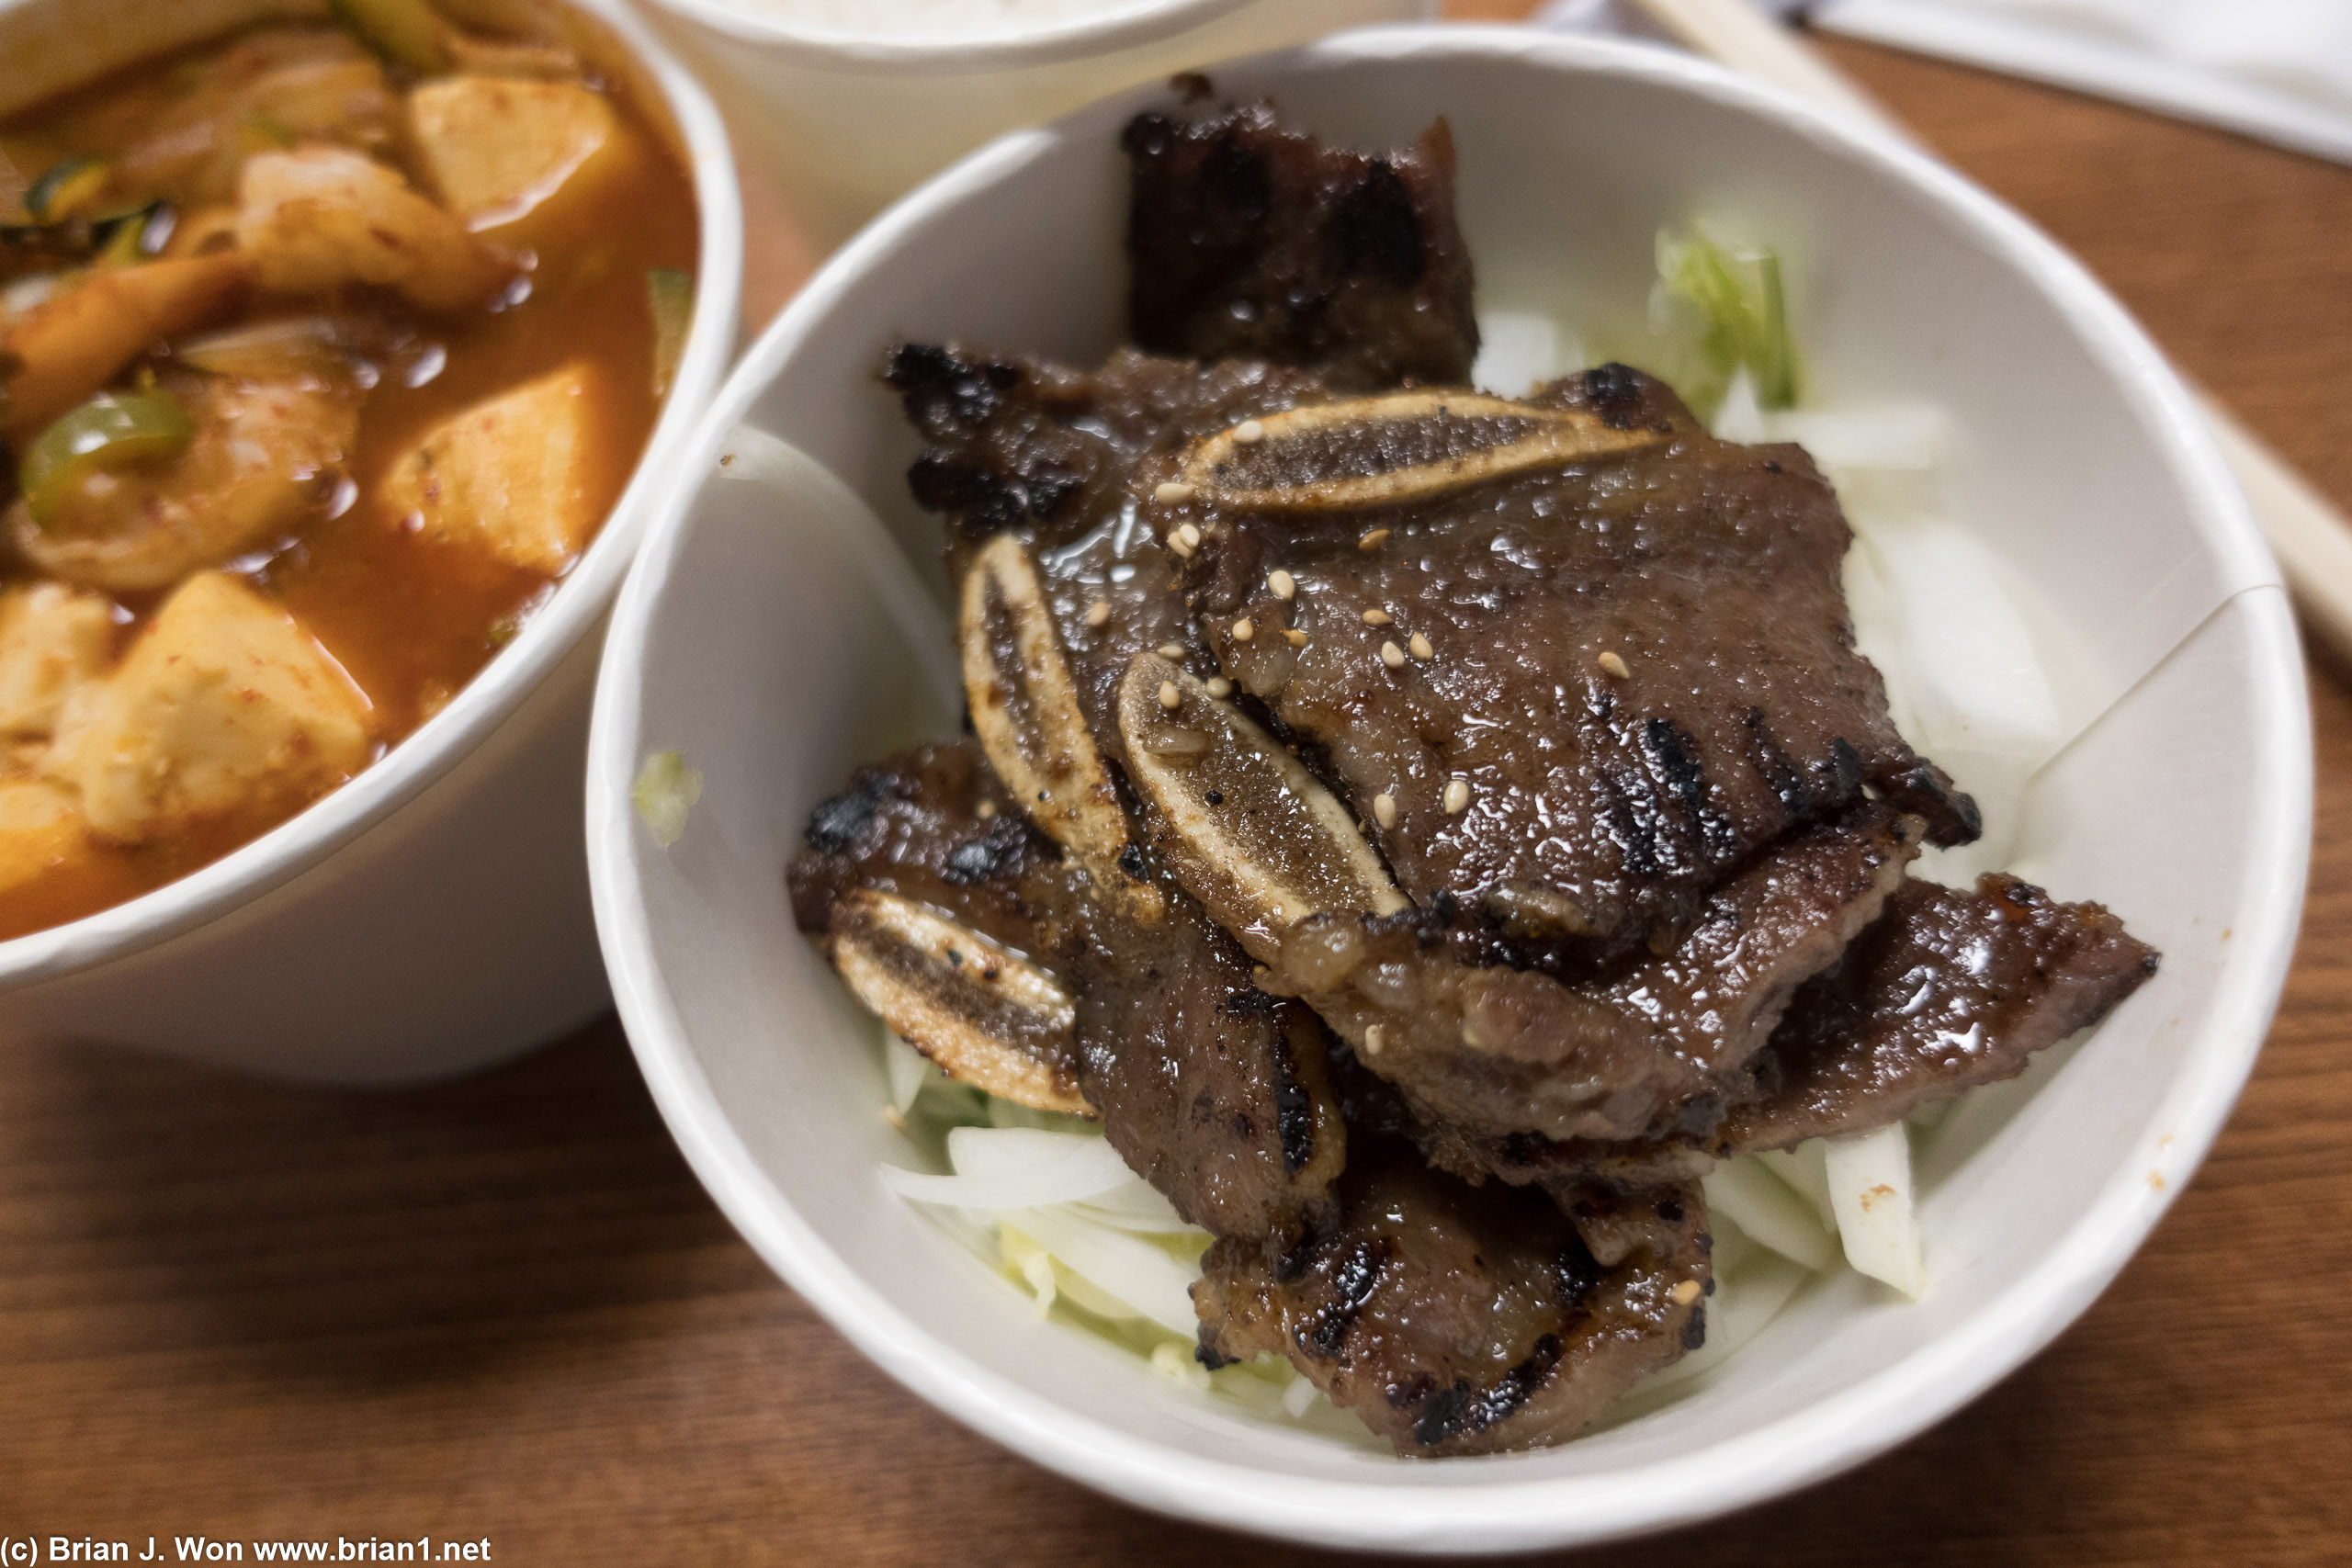 $12 for this much galbi? Eeeesh beef has gotten expensive.